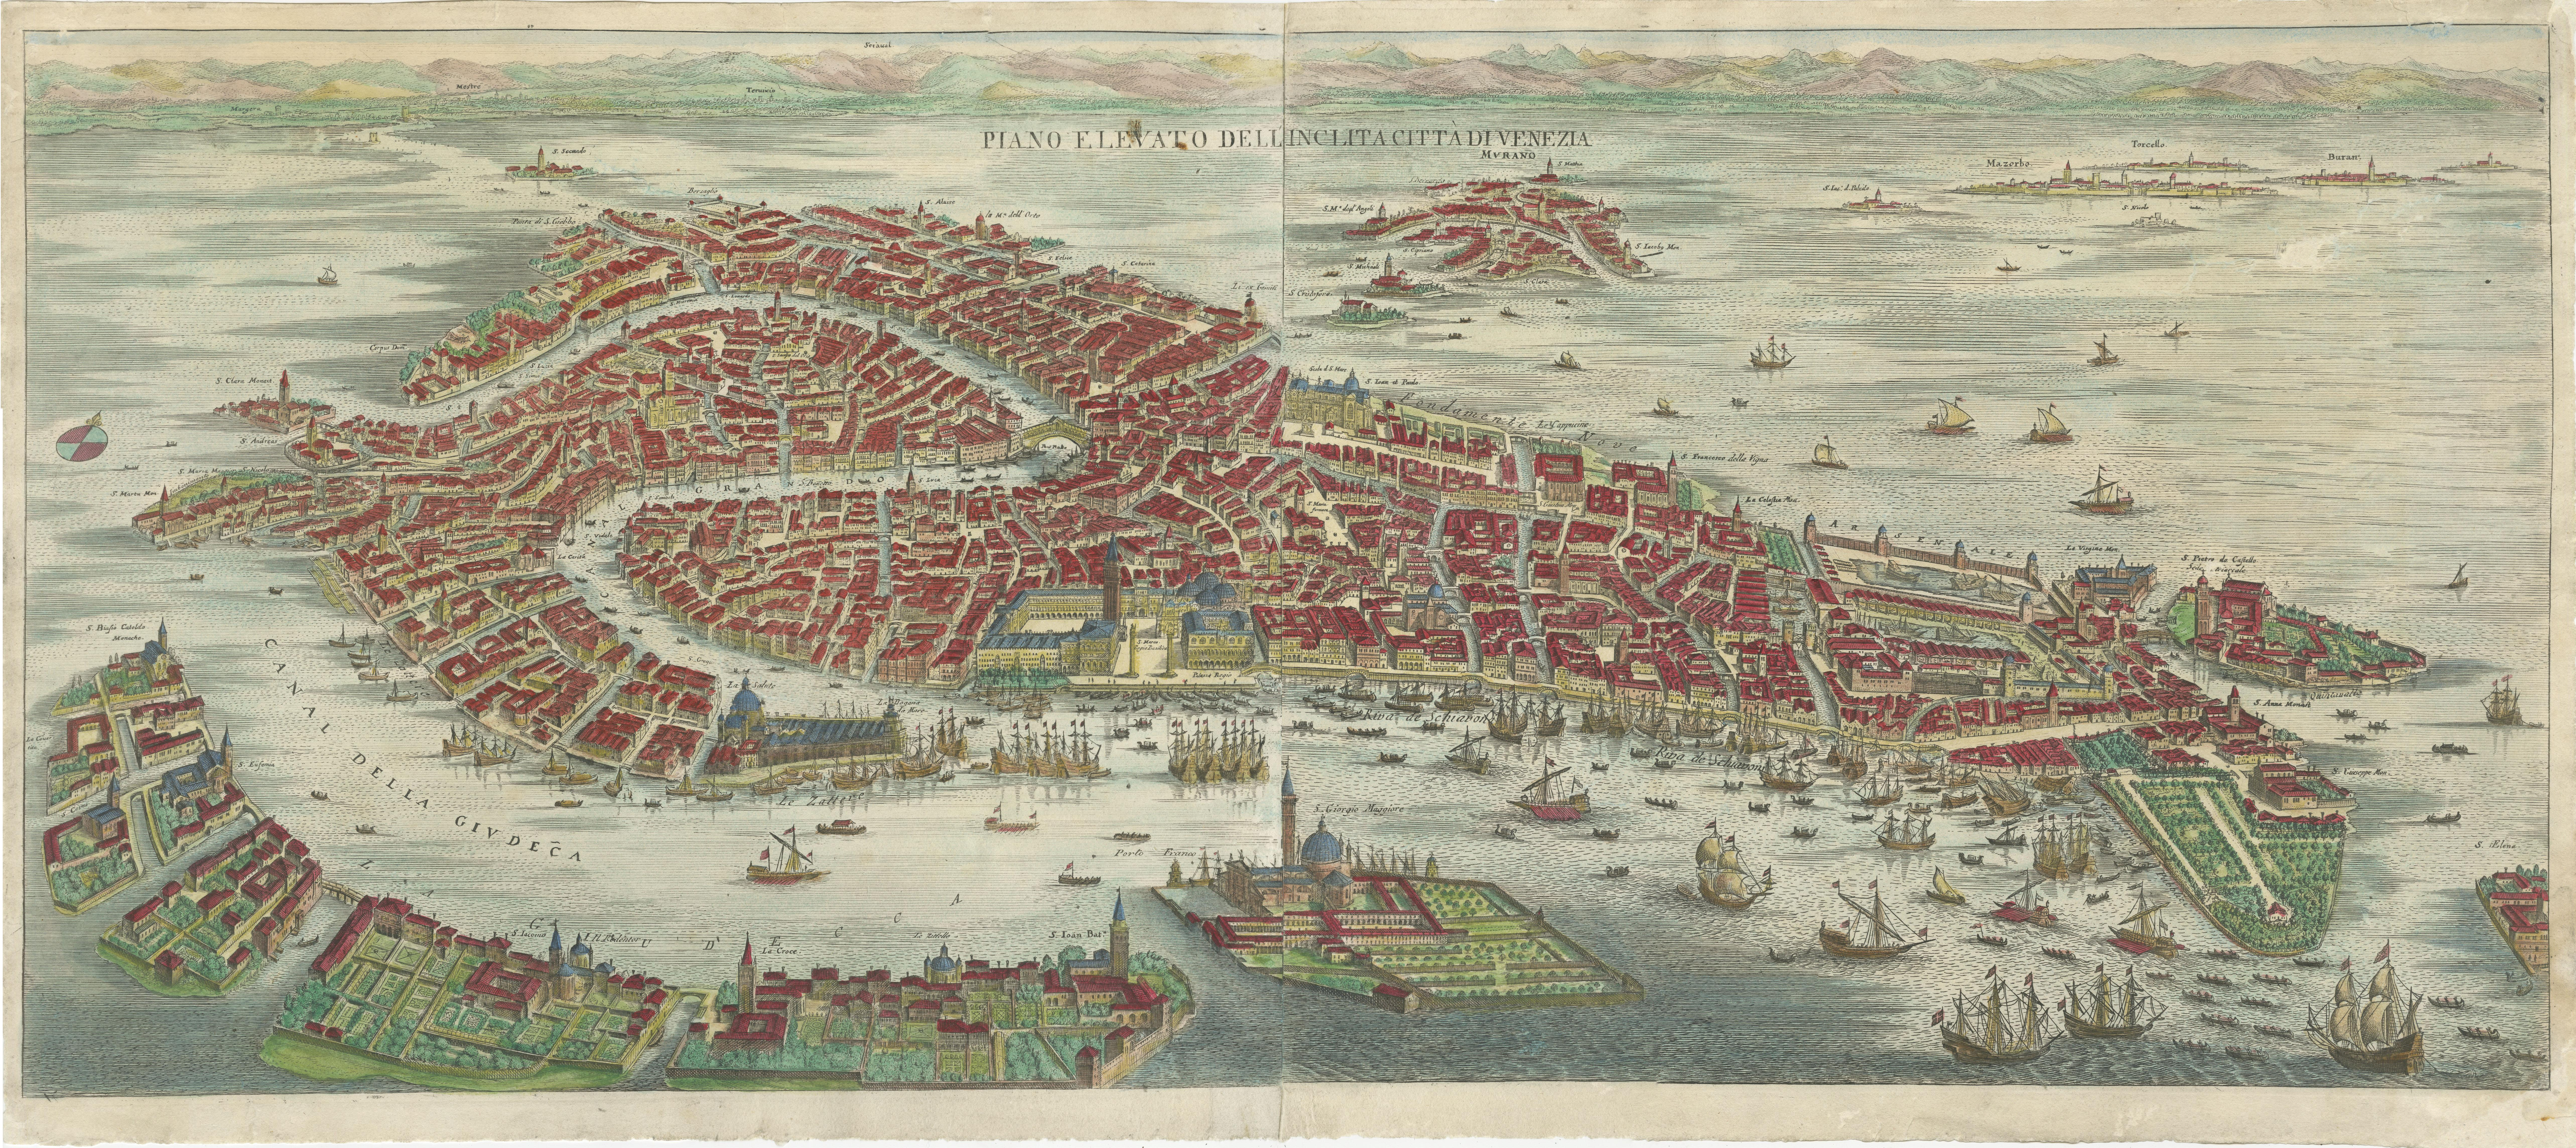 Title: Piano elevato dell'inclita città di Venezia

Bird's-eye view (etching) of Venice.

Print made by: Marco Sebastiano Giampiccoli
After: Matthäus Merian I

Two copper engraved sheets joined, later coloring, blank verso. First issued as a